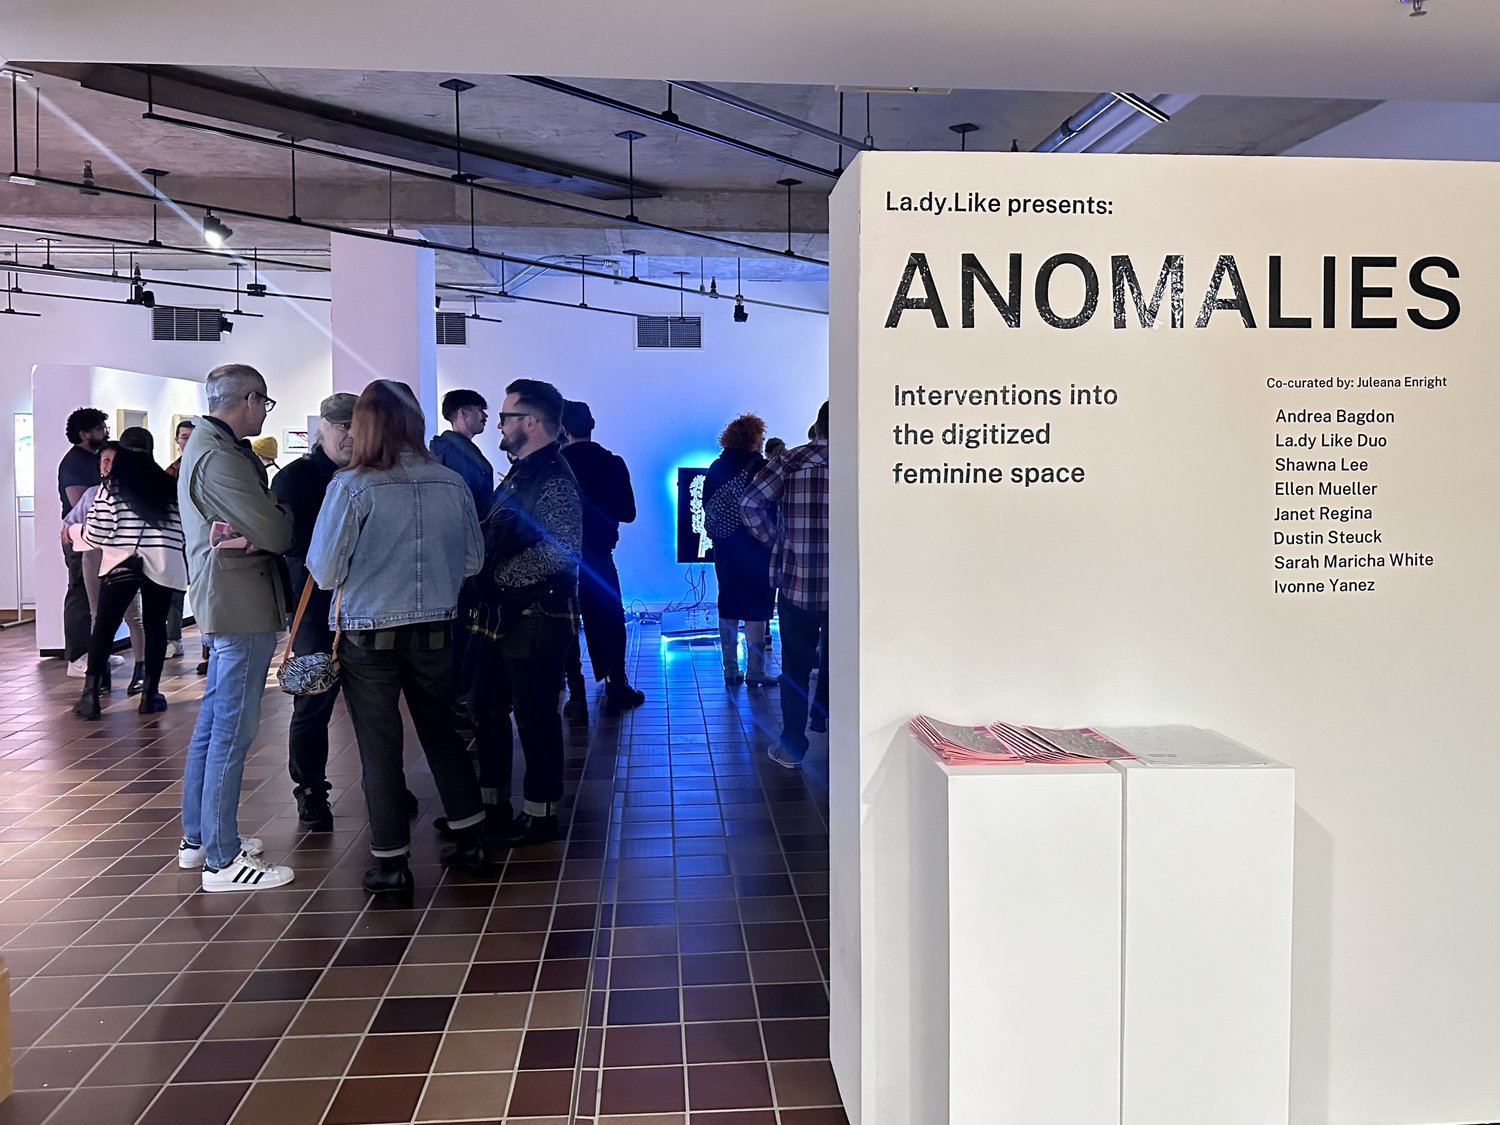 Opening wall of Anomalies exhibition. The wall contains vinyl with all of the names of artists participating in the show. Behind the wall are many groups of people chatting on opening night.